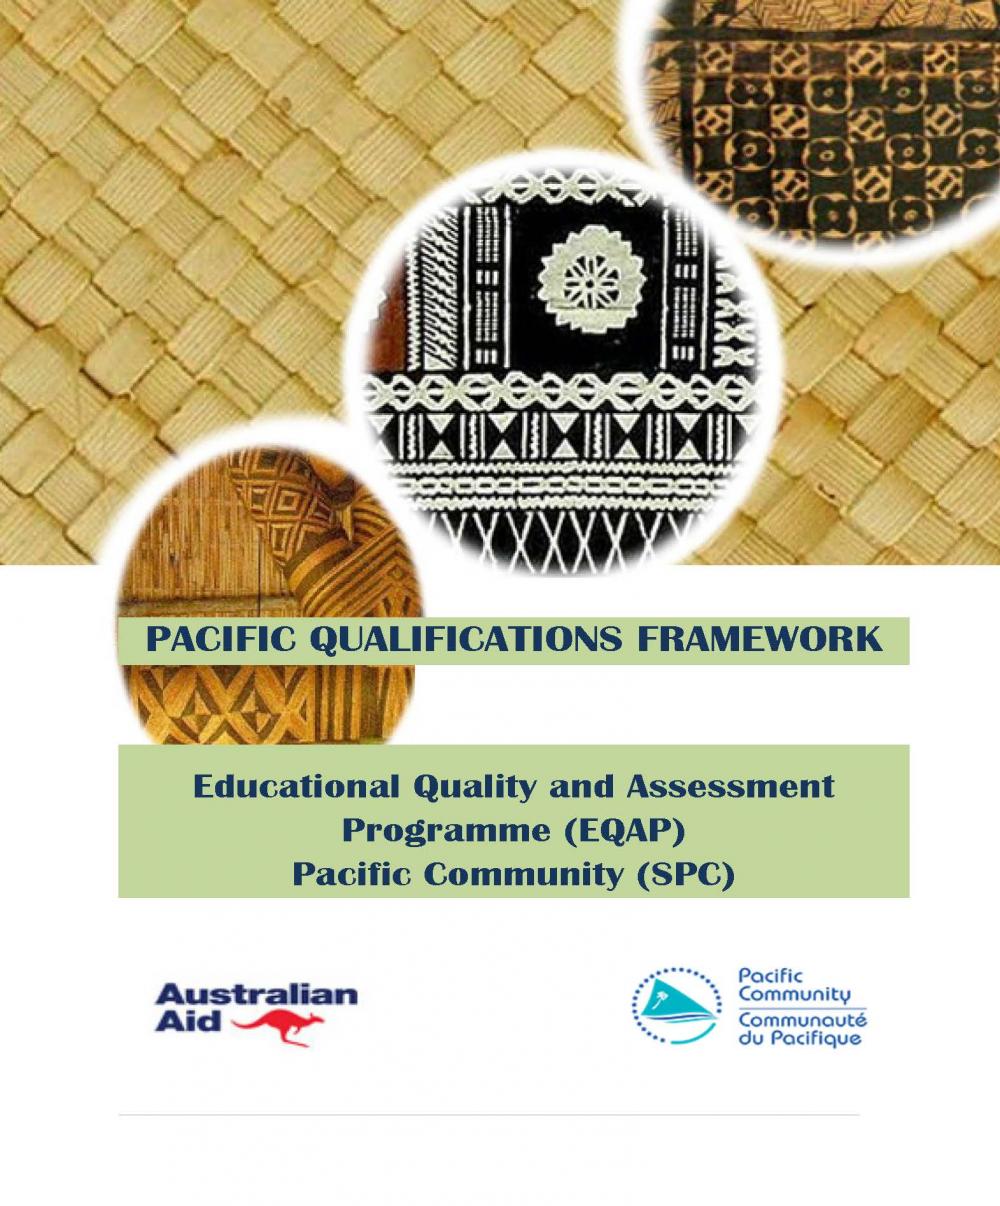 Pacific Qualifications Framework